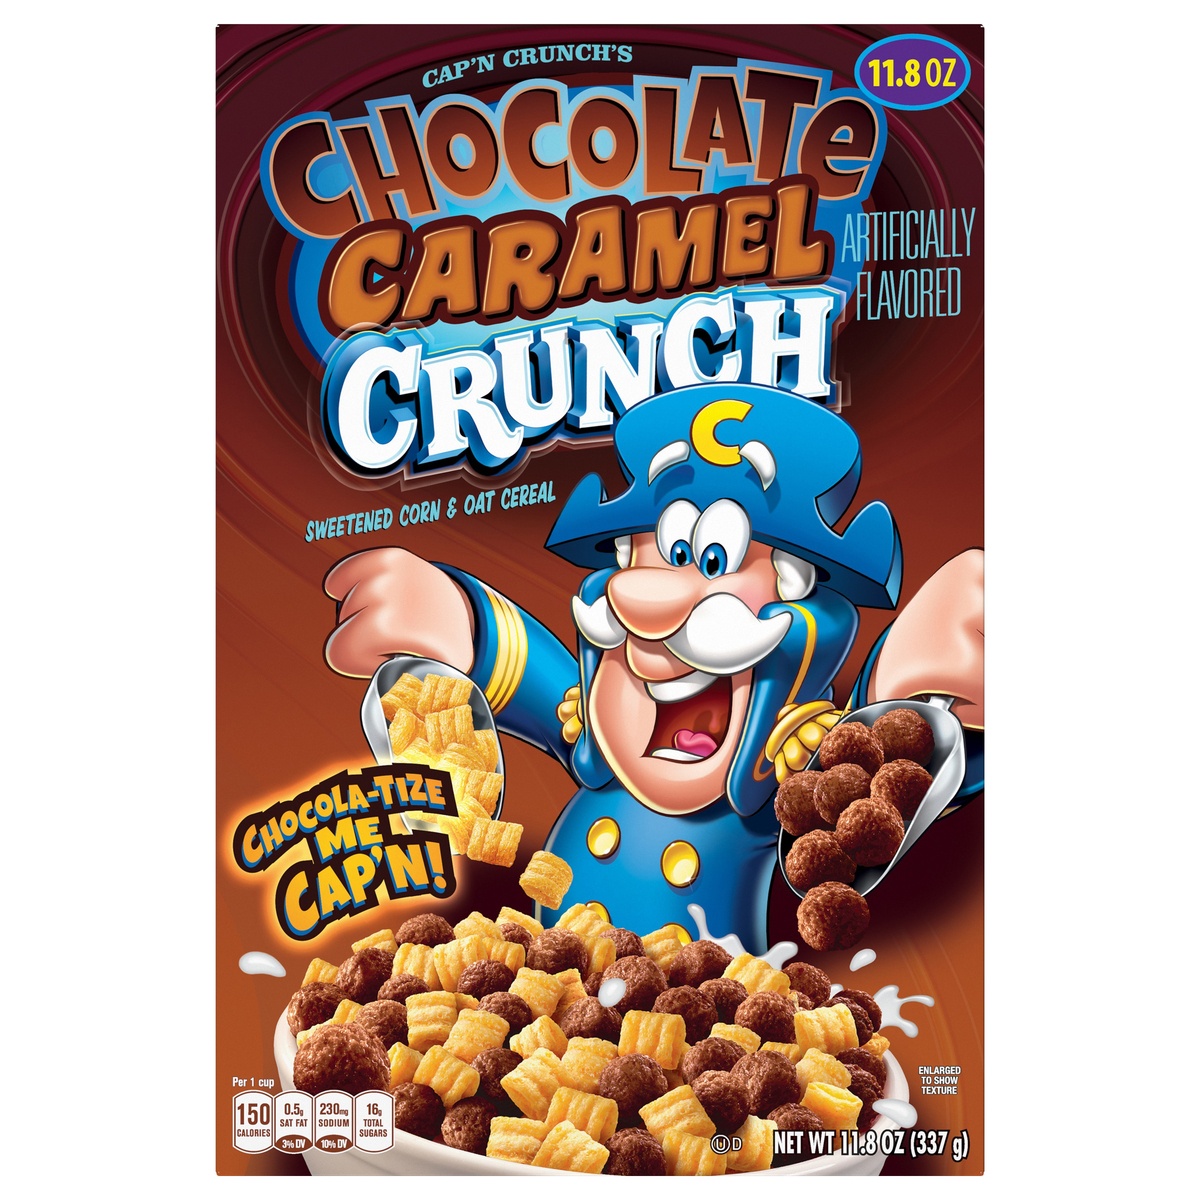 slide 1 of 1, Cap'N Crunch's Sweetened Corn & Oat Cereal Chocolate Caramel Crunch Artificially Flavored 11.8 Oz, 11.8 oz